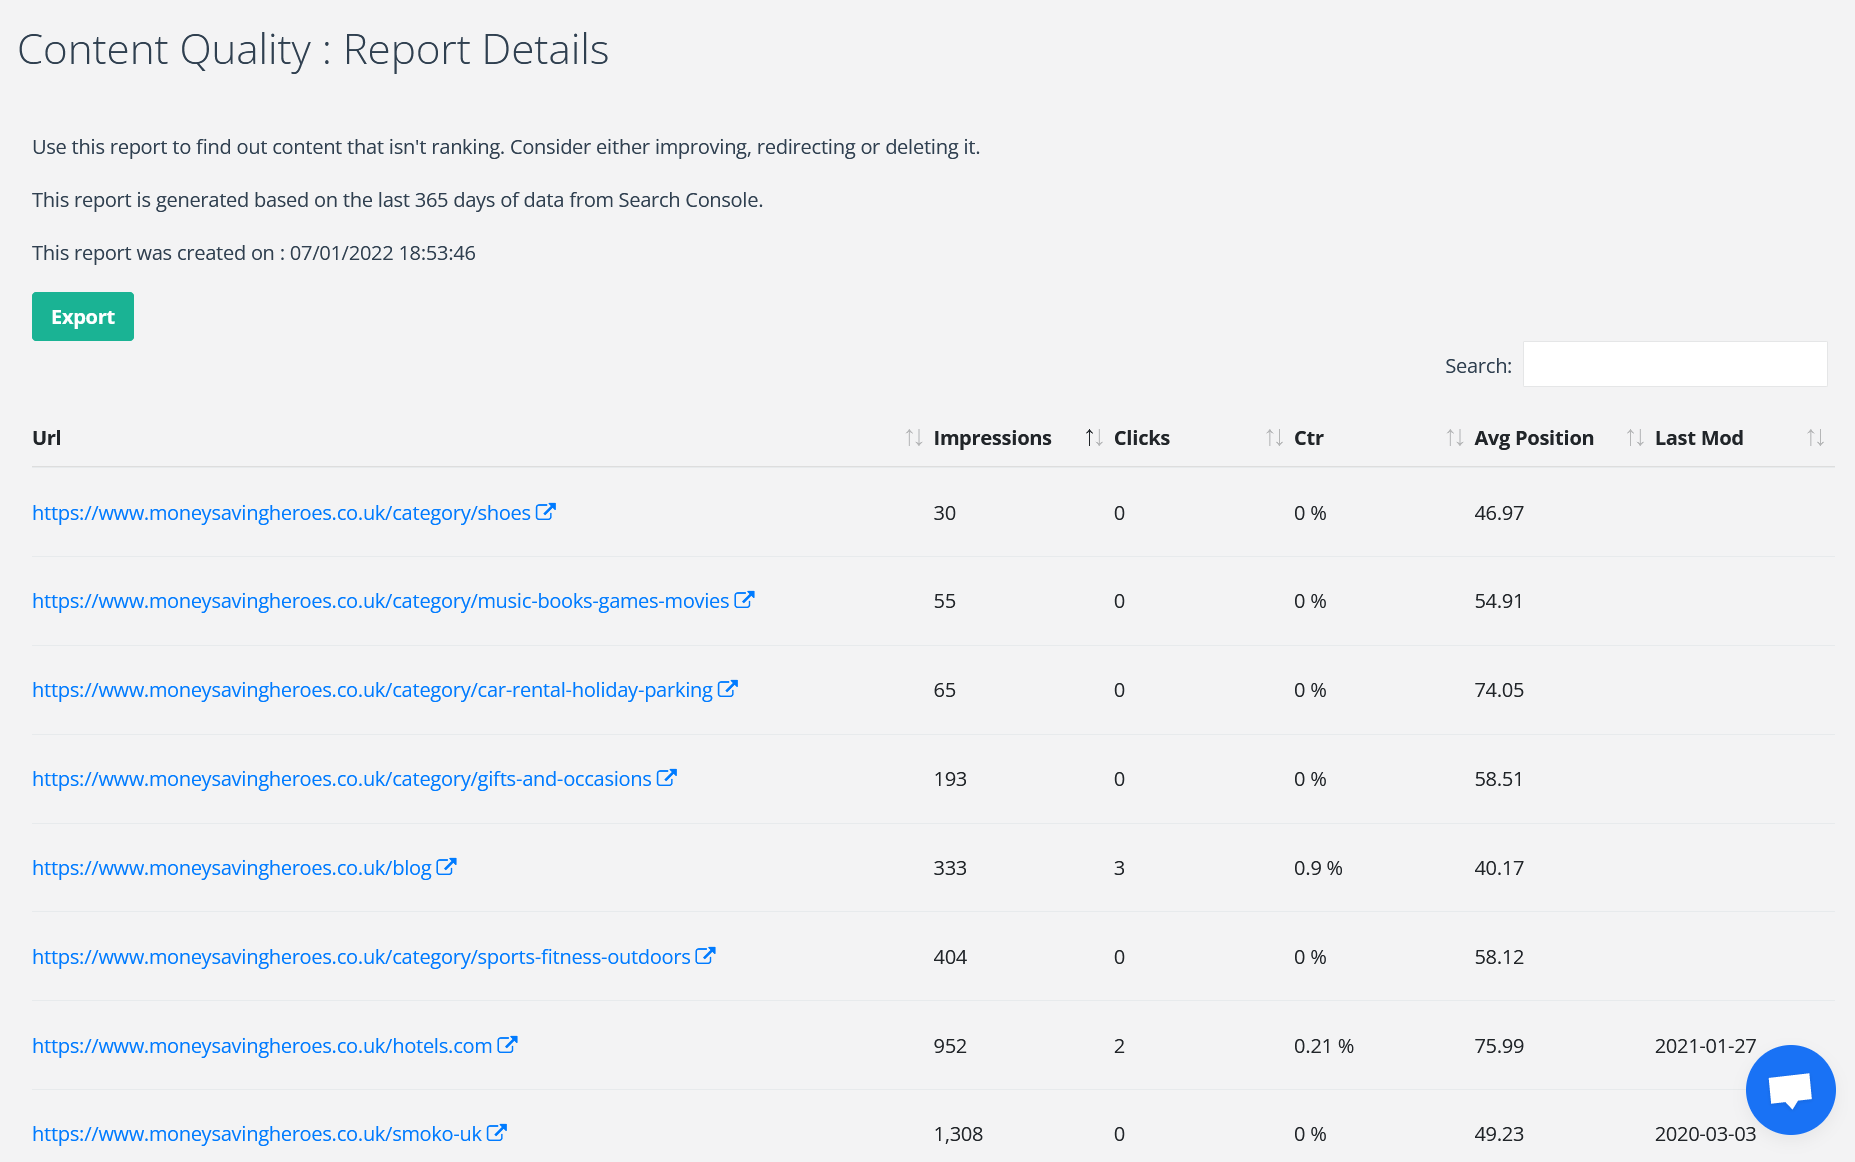 SEOTesting's Content Quality report shows pages getting very few or no impressions from Google.